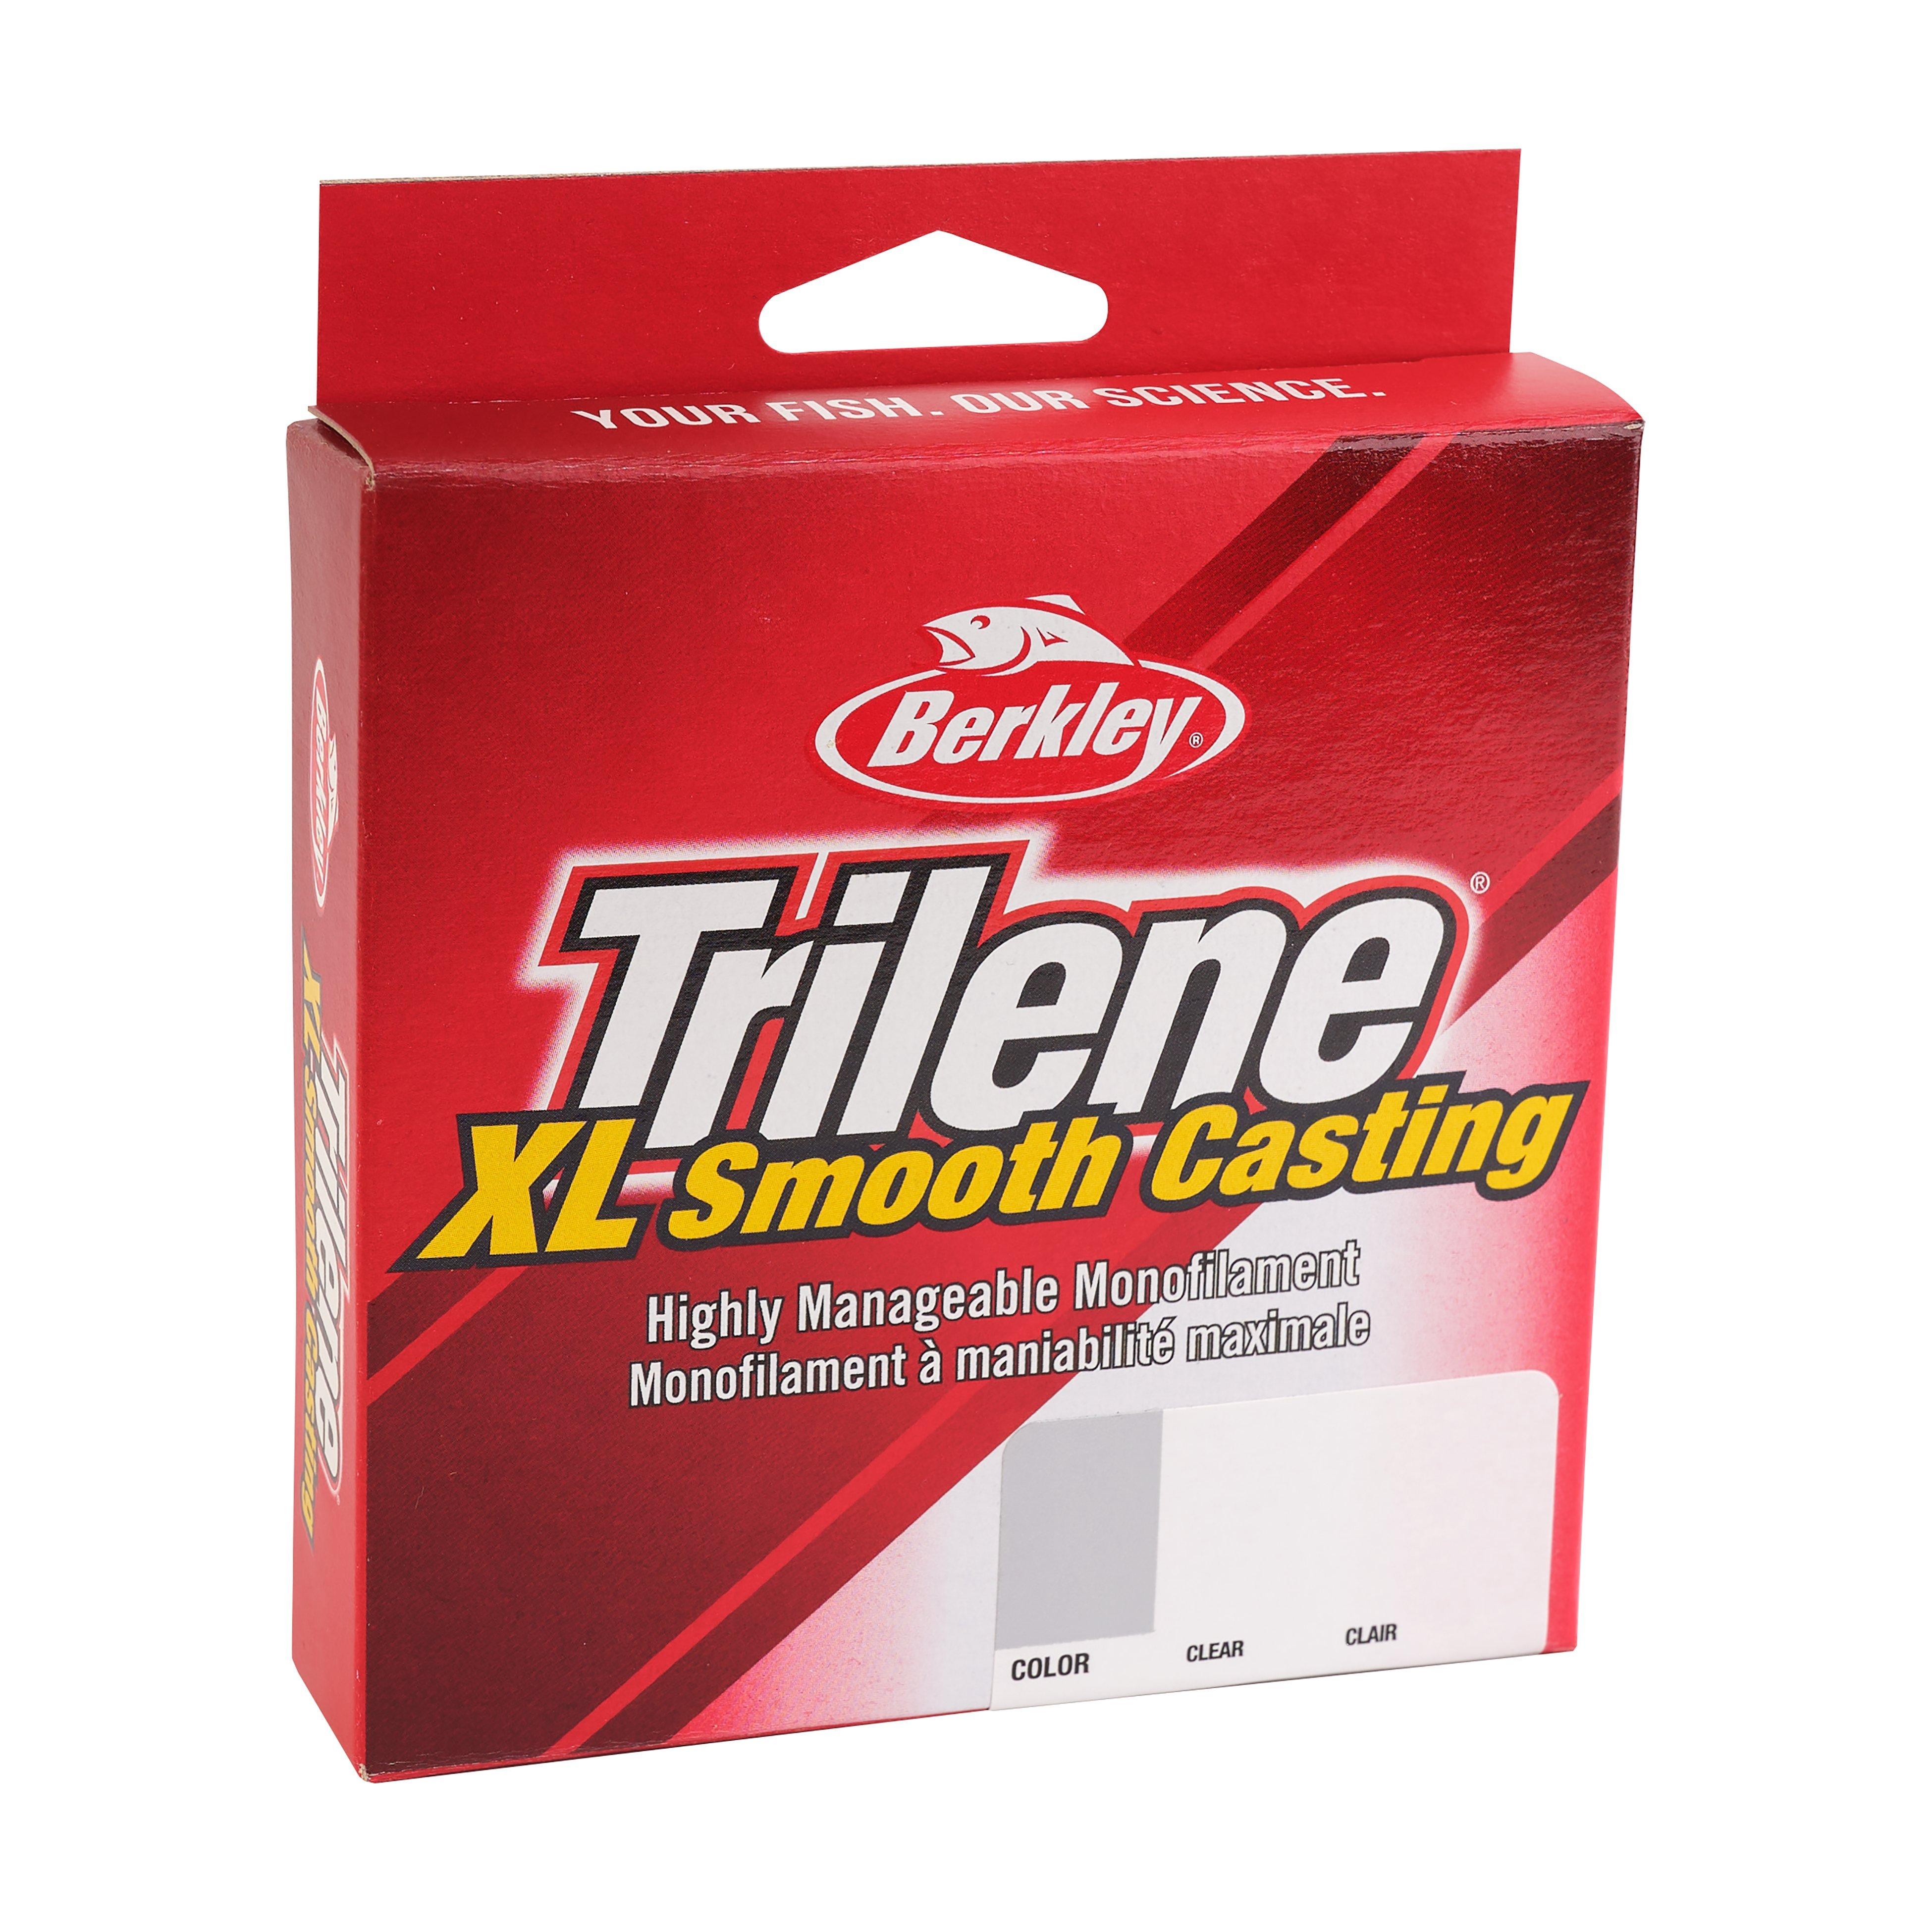 CF Blue Details about   Berkley Trilene XL Smooth Casting fishing line Choose your line weight 